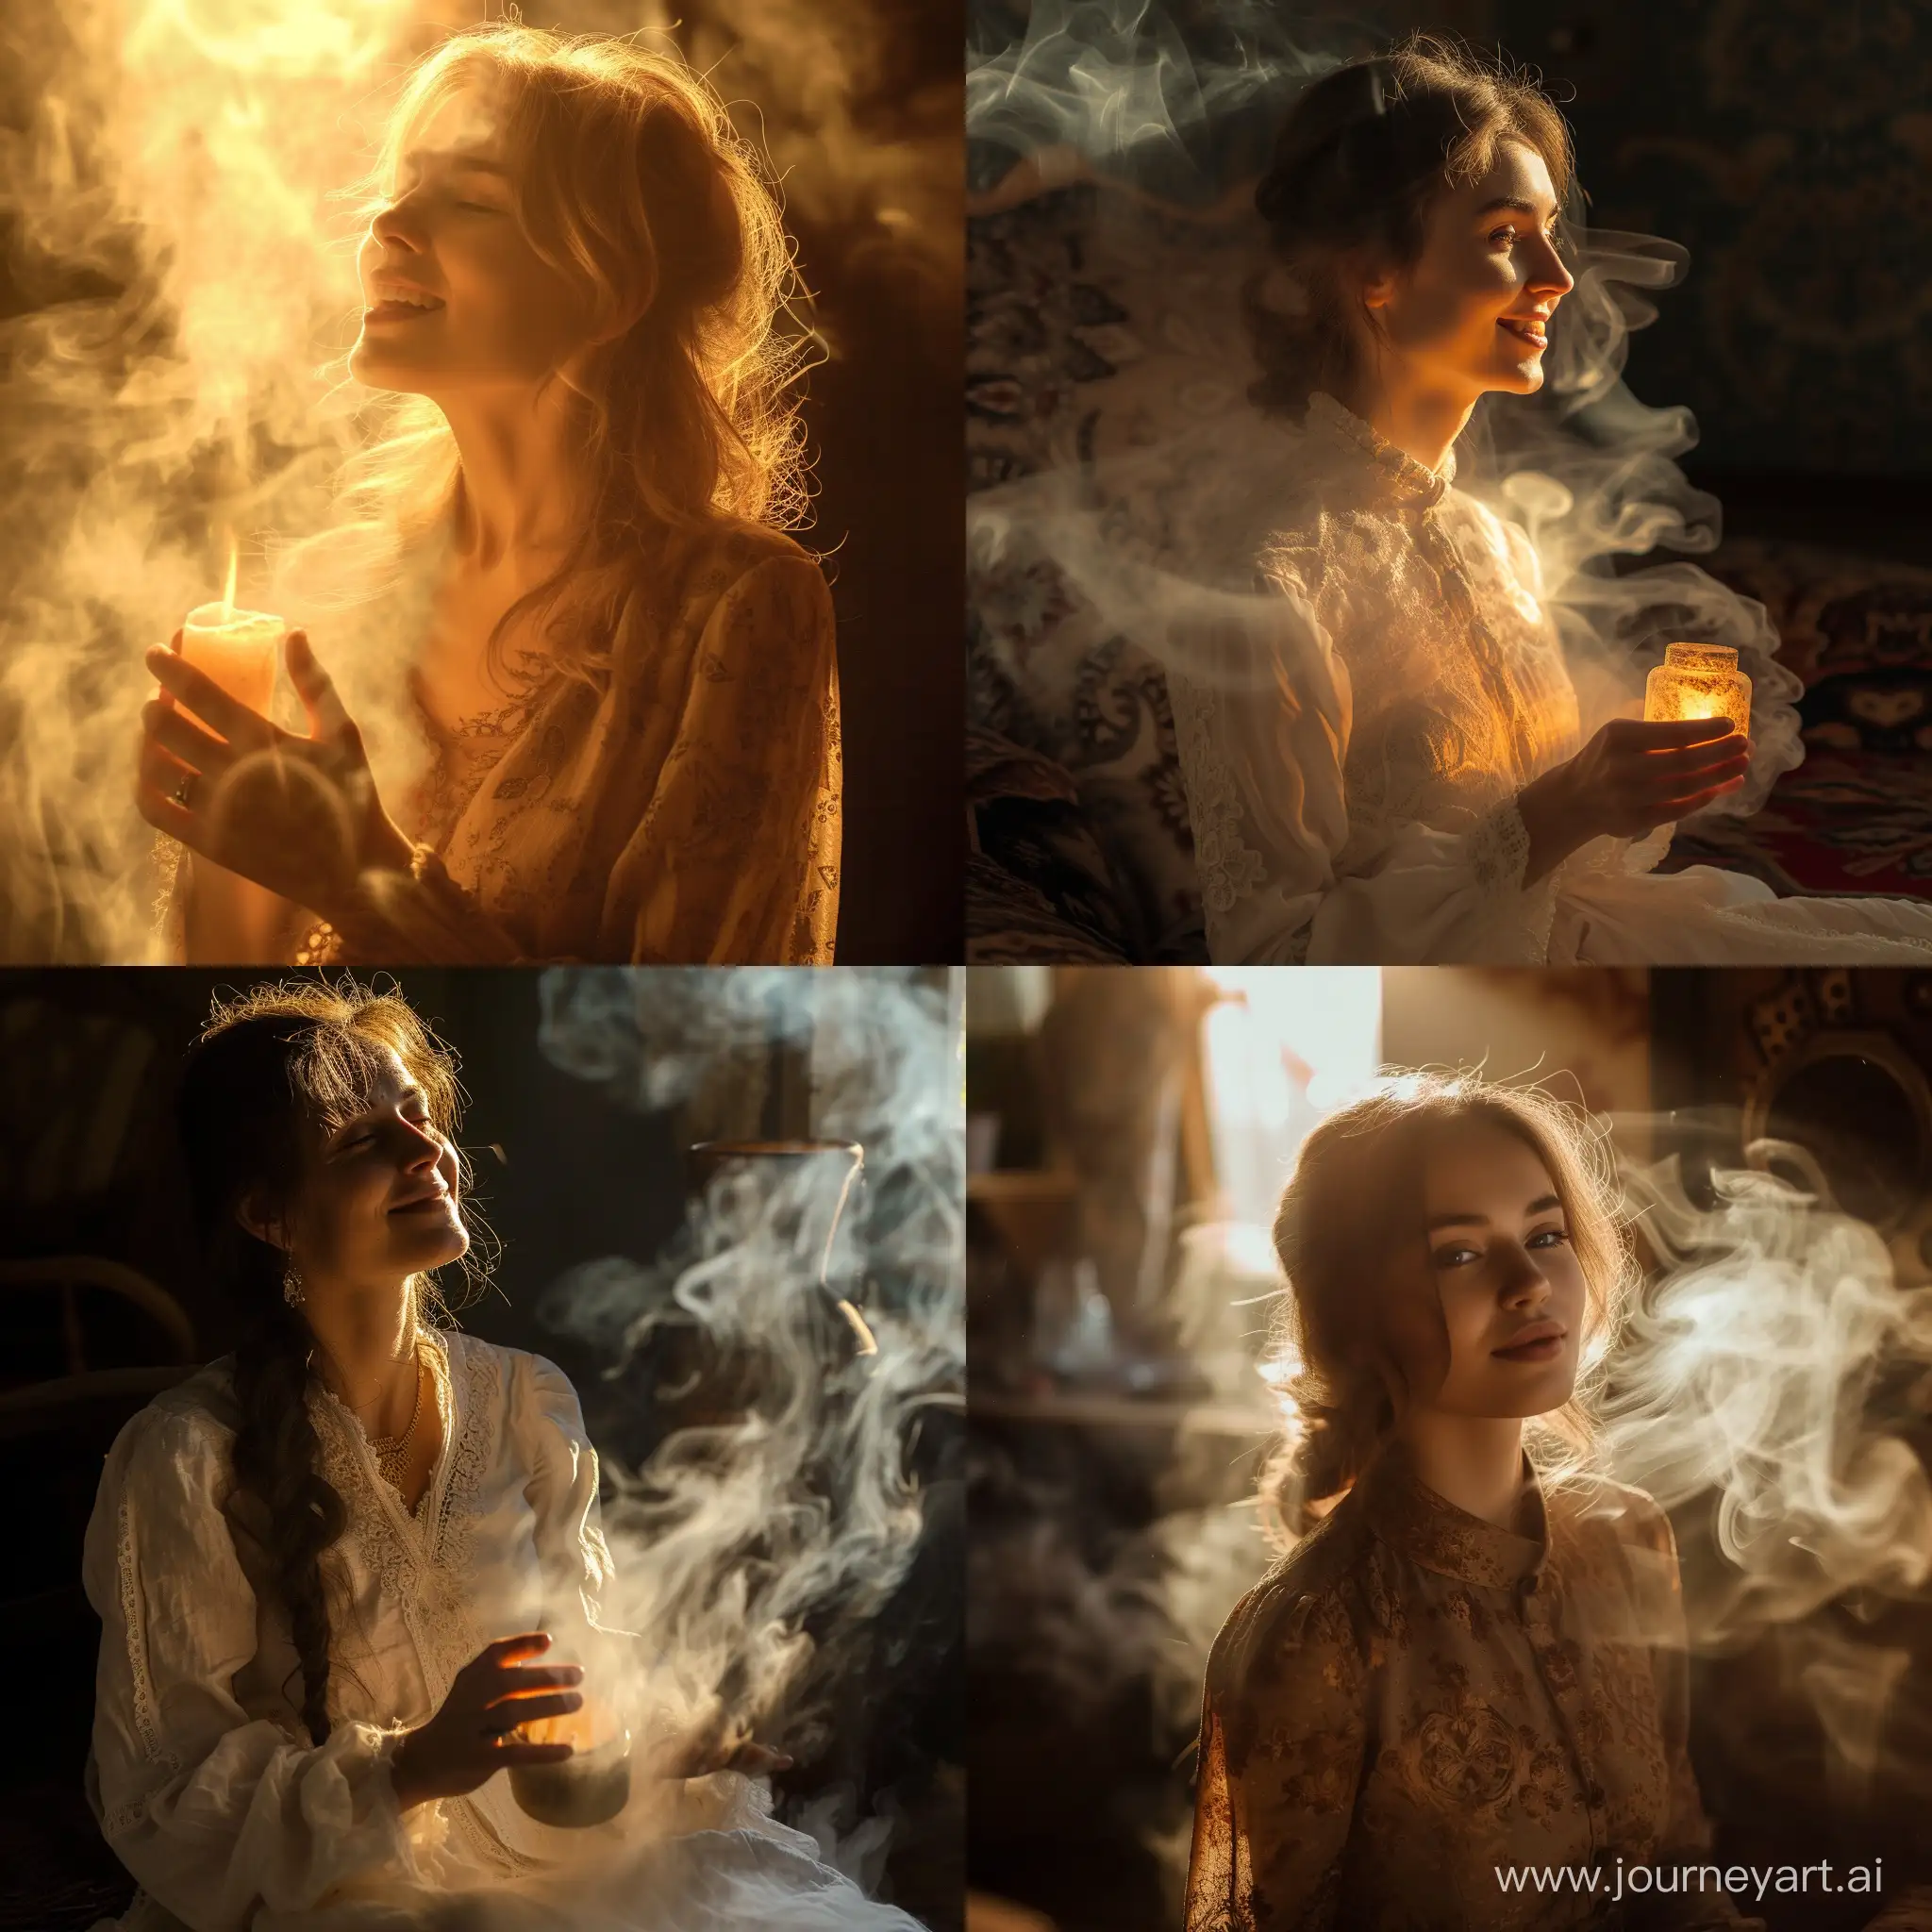 Joyful-Slavic-Woman-Surrounded-by-Warmth-and-Coziness-in-Soft-Light